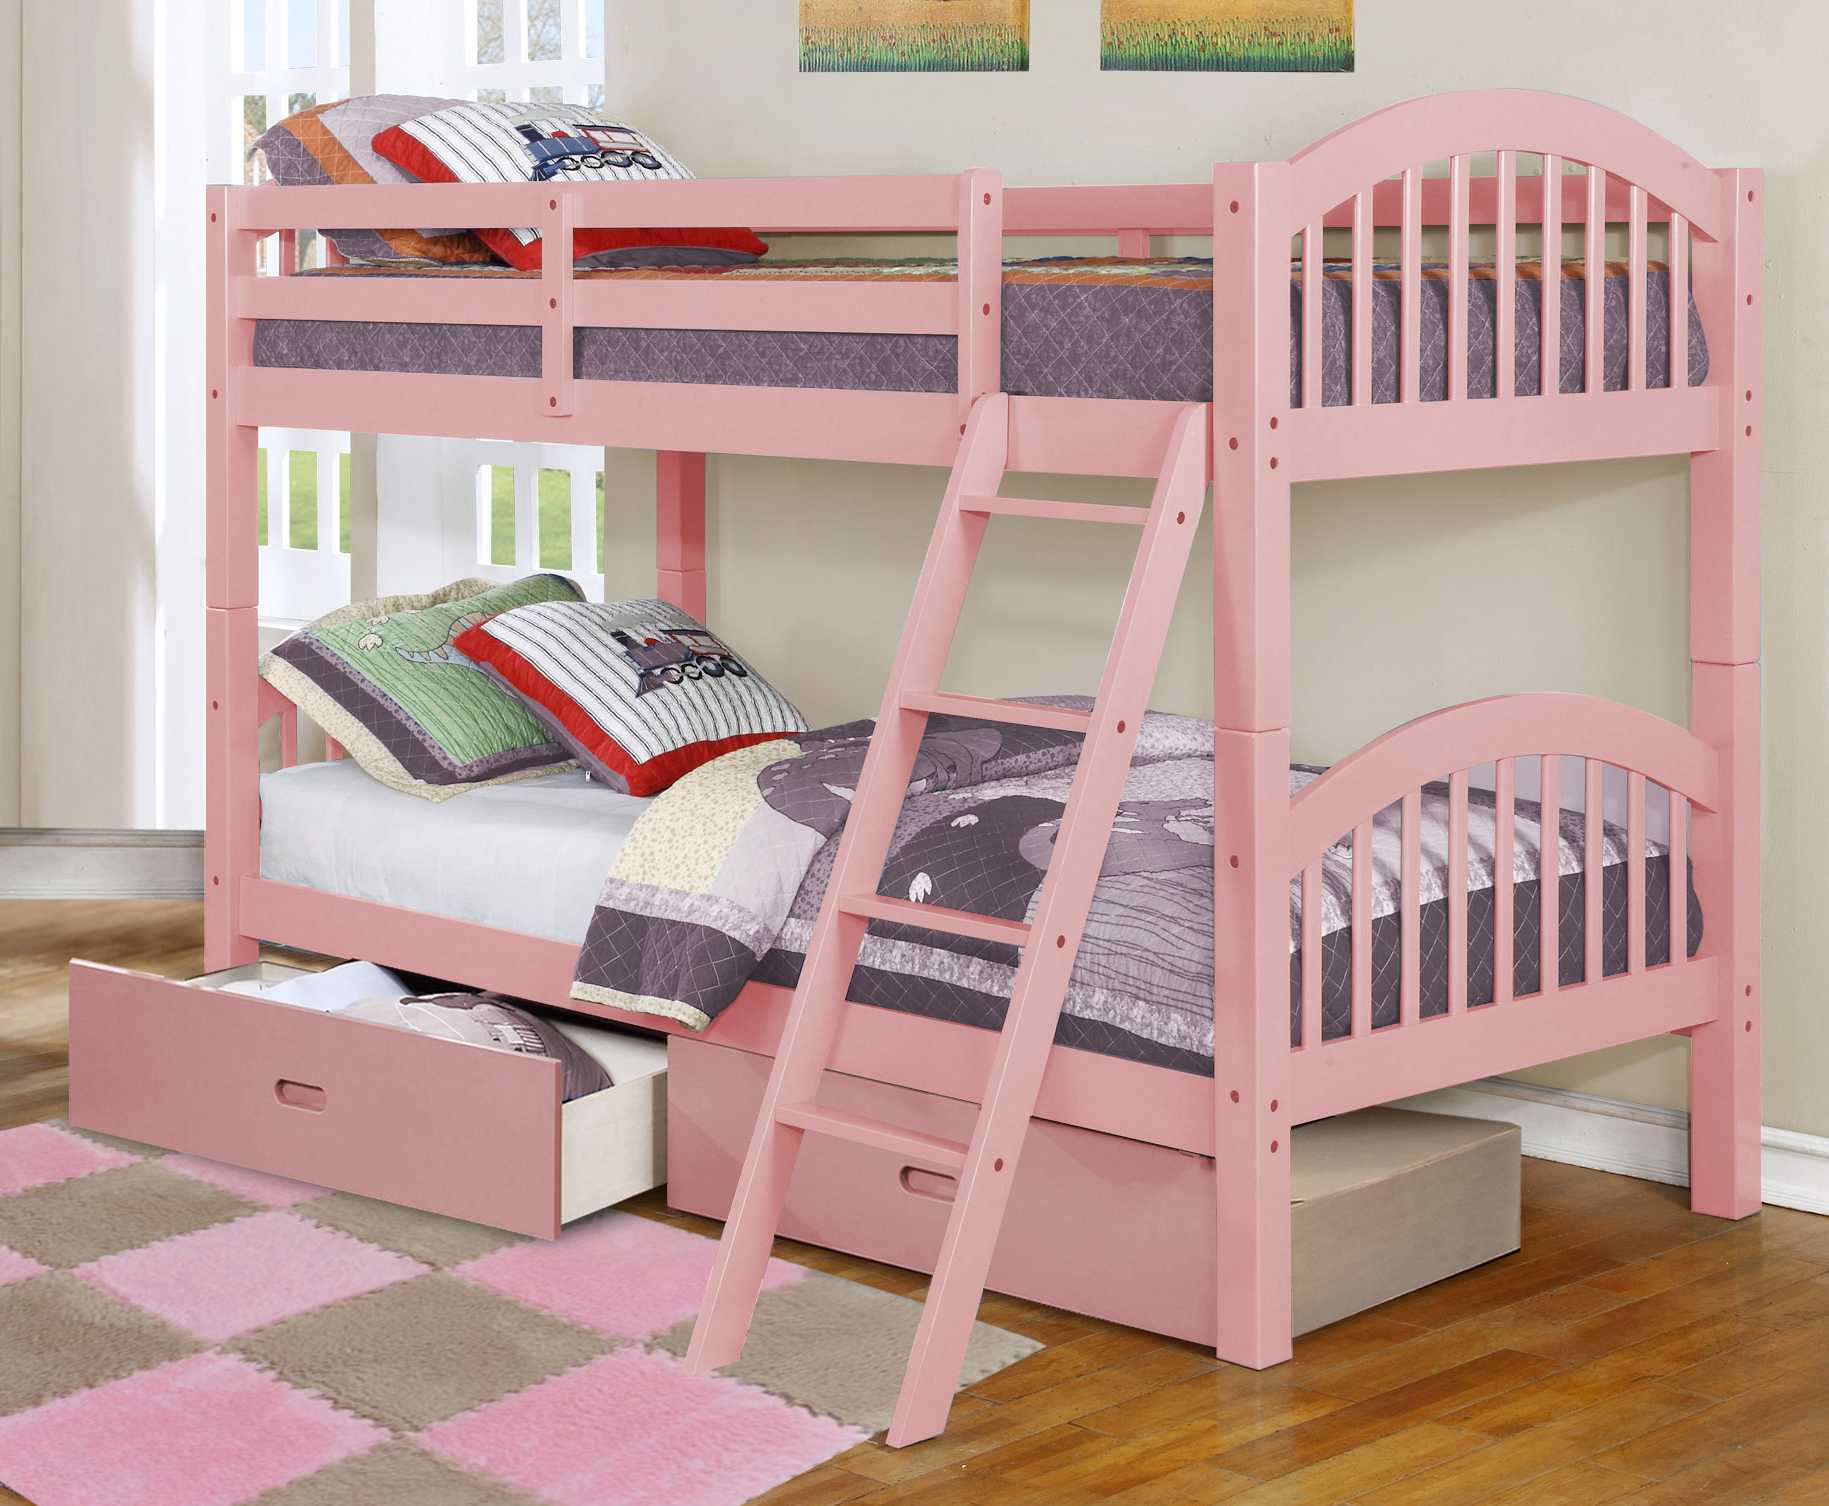 81.25" X 42.5" X 62.5" Pink Solid and Manufactured Wood Twin or Twin Arched Wood Bunk Bed with 2 Drawers